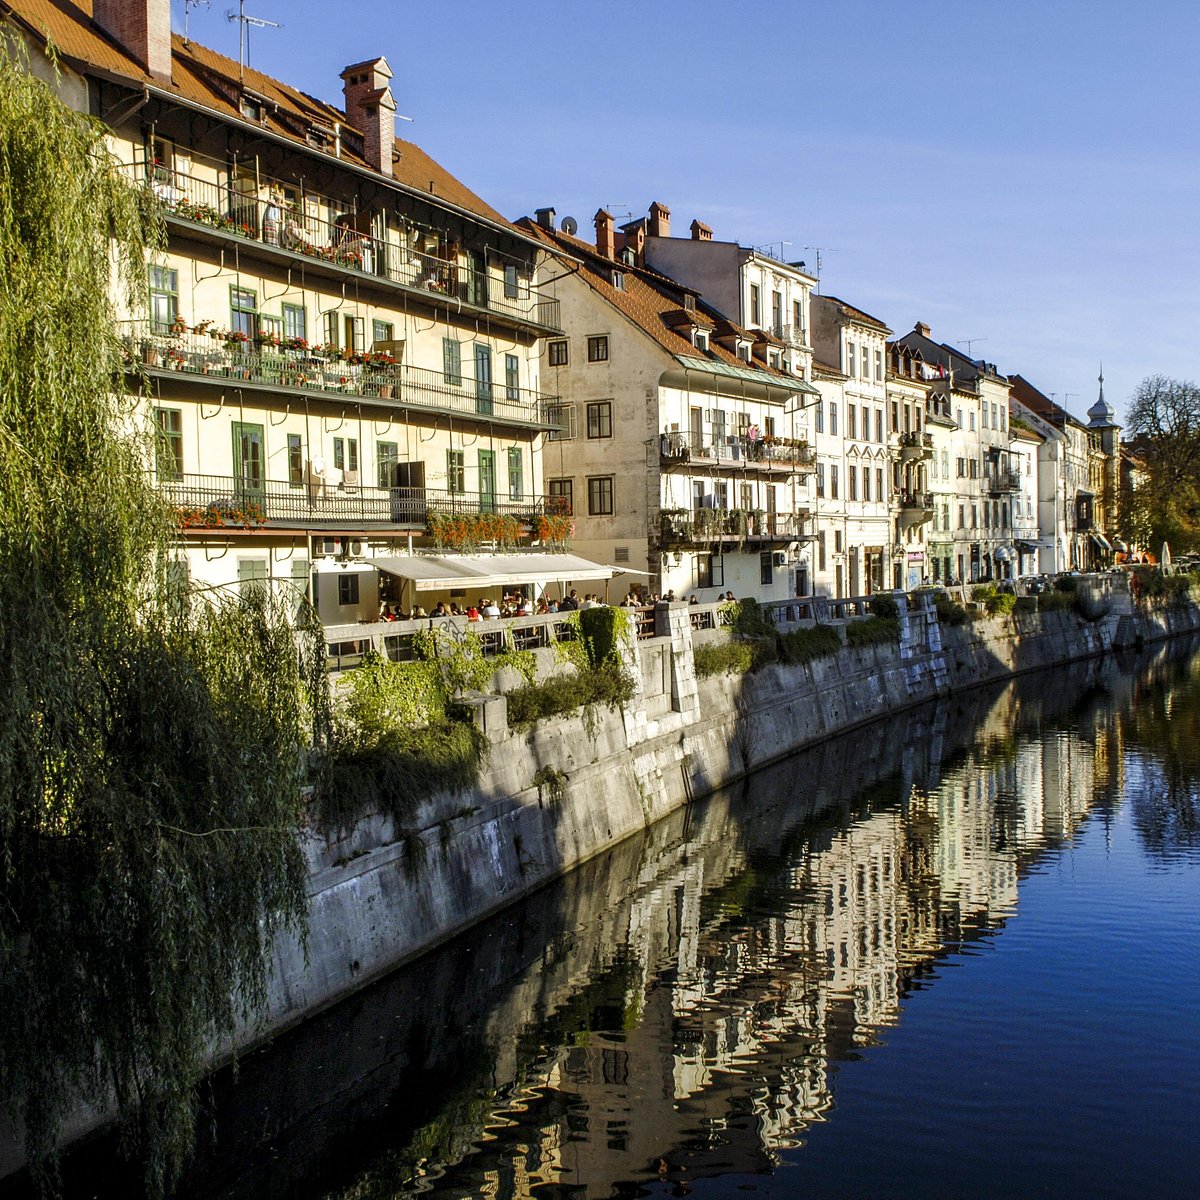 Day Trips Slovenia (Ljubljana) - All You Need to Know BEFORE You Go